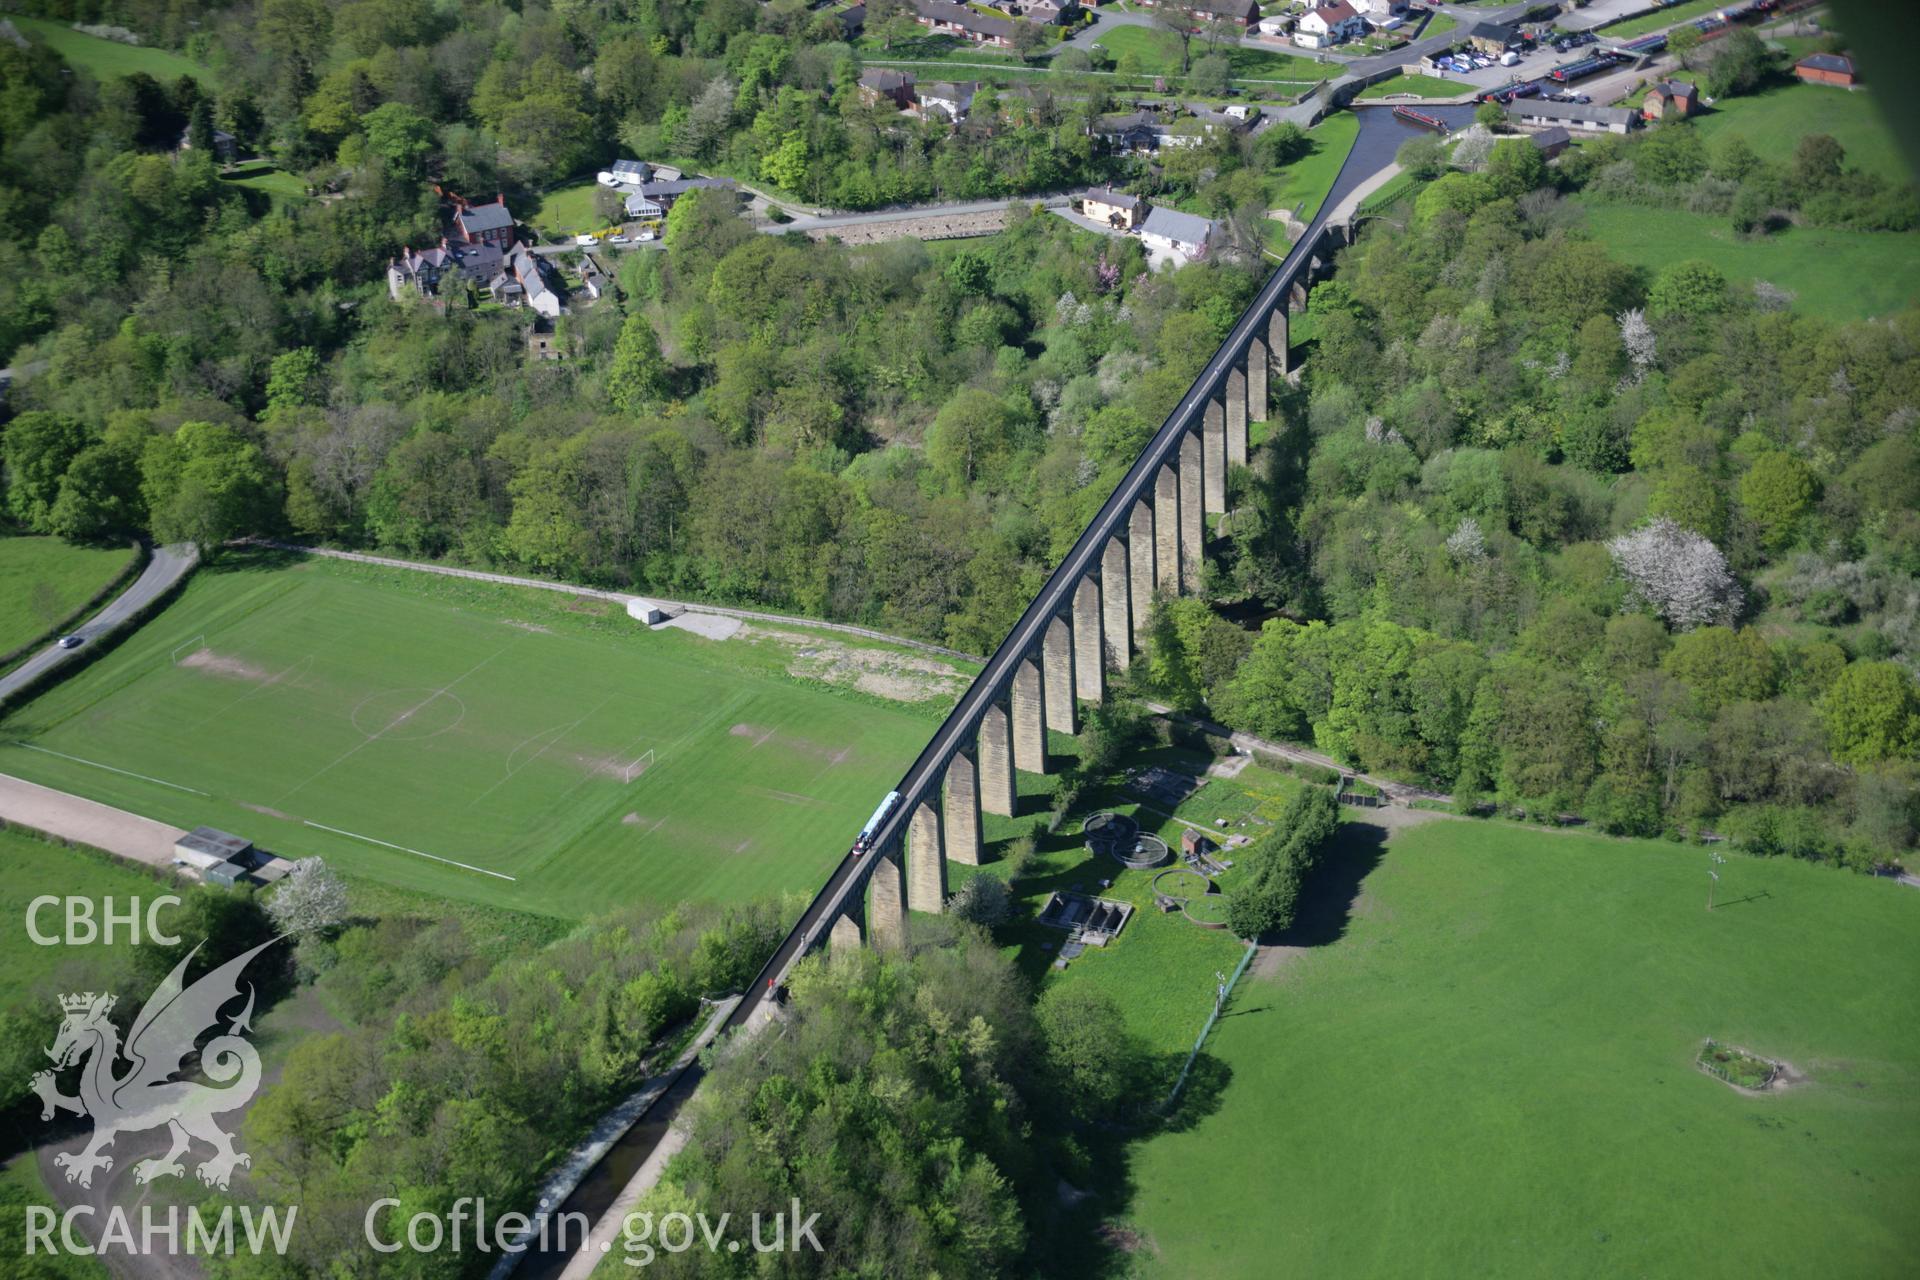 RCAHMW digital colour oblique photograph of Pontcysyllte Aqueduct viewed from the south-east. Taken on 05/05/2006 by T.G. Driver.